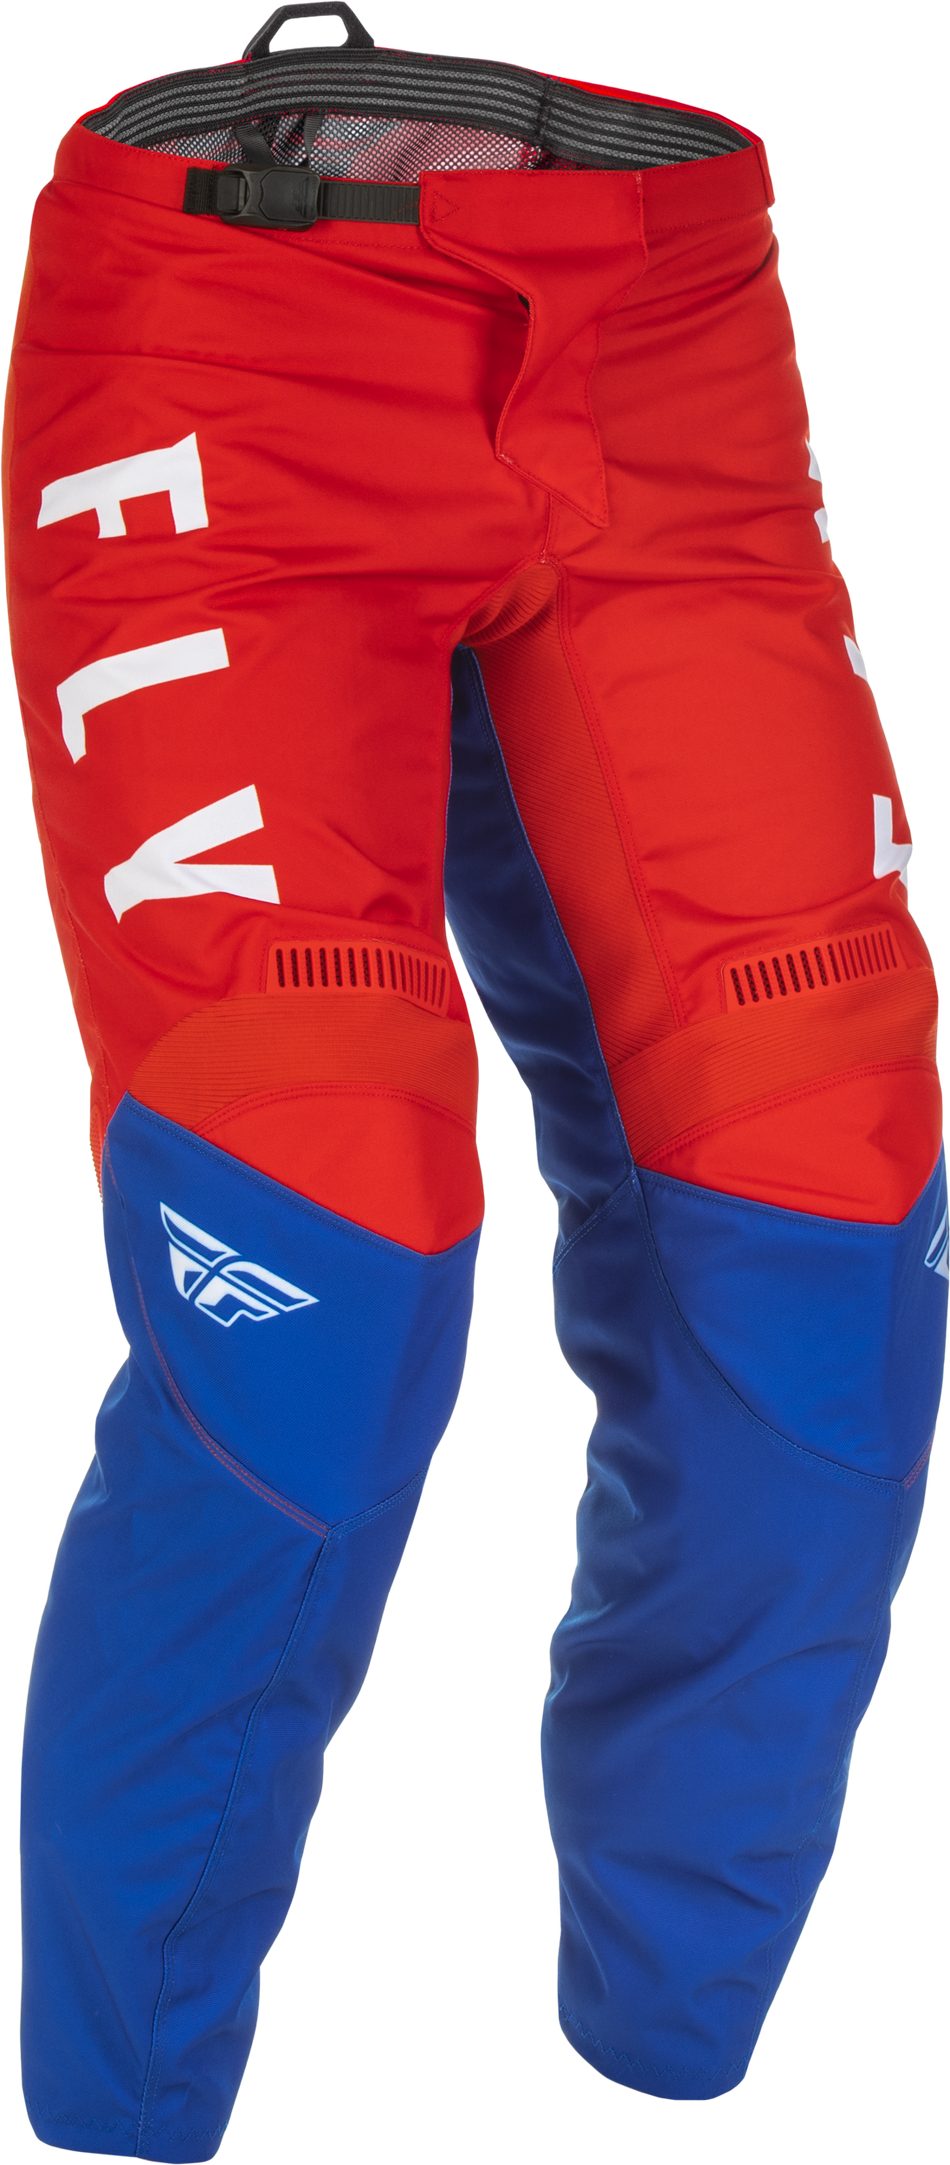 FLY RACING F-16 Pants Red/White/Blue Sz 40 375-93440